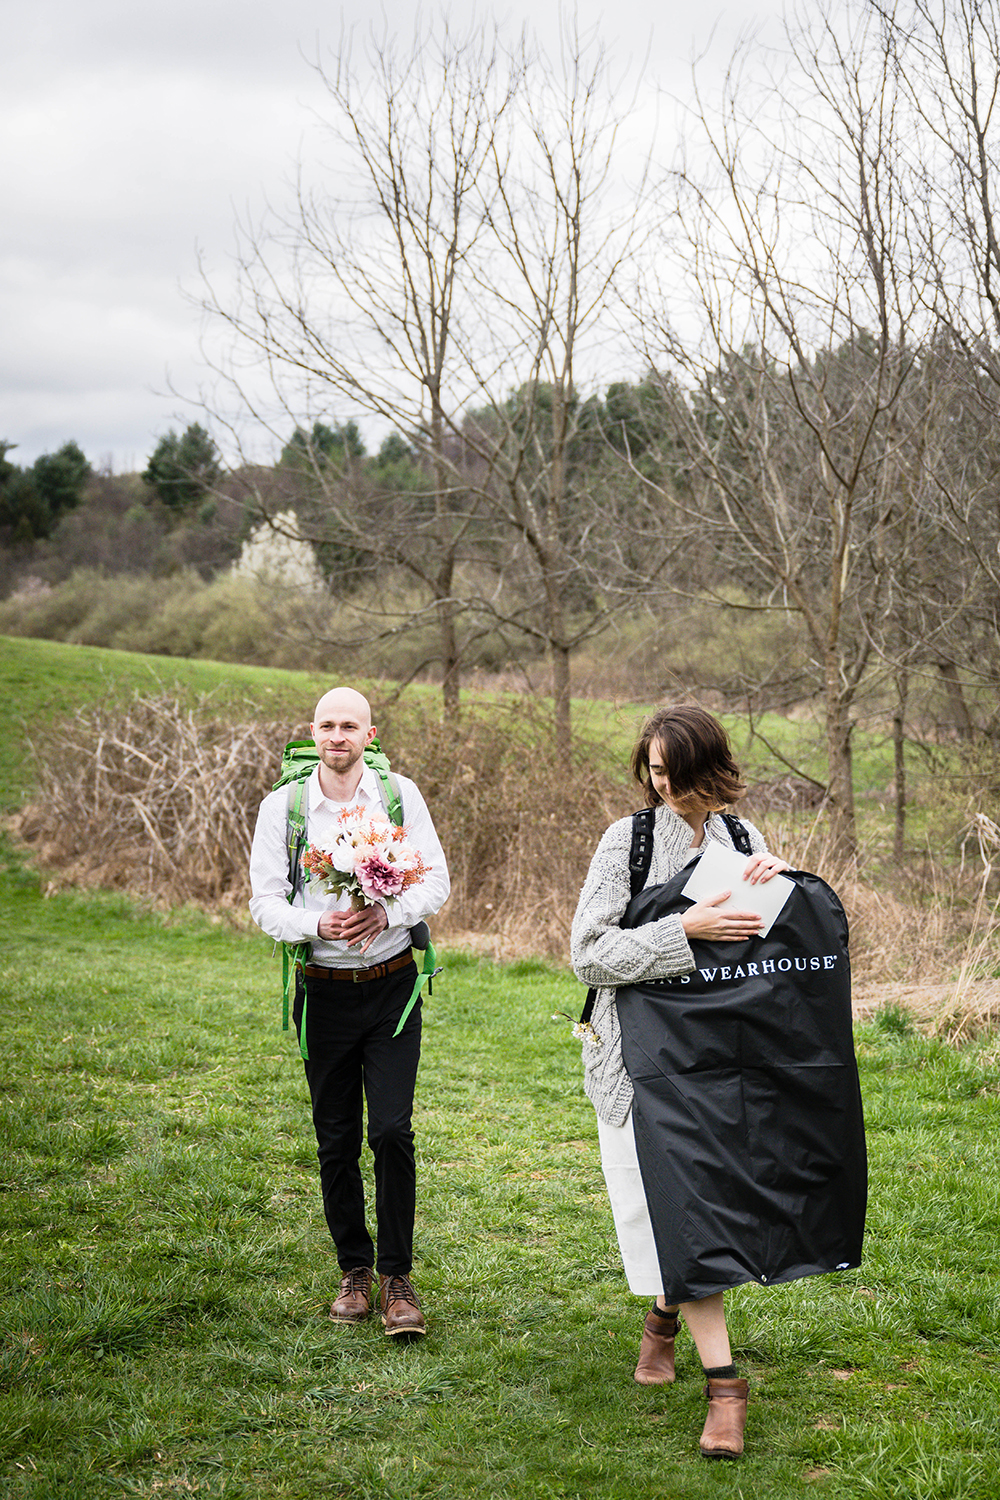 A couple walk together holding various items they need for their ceremony on their elopement day at Heritage Park.